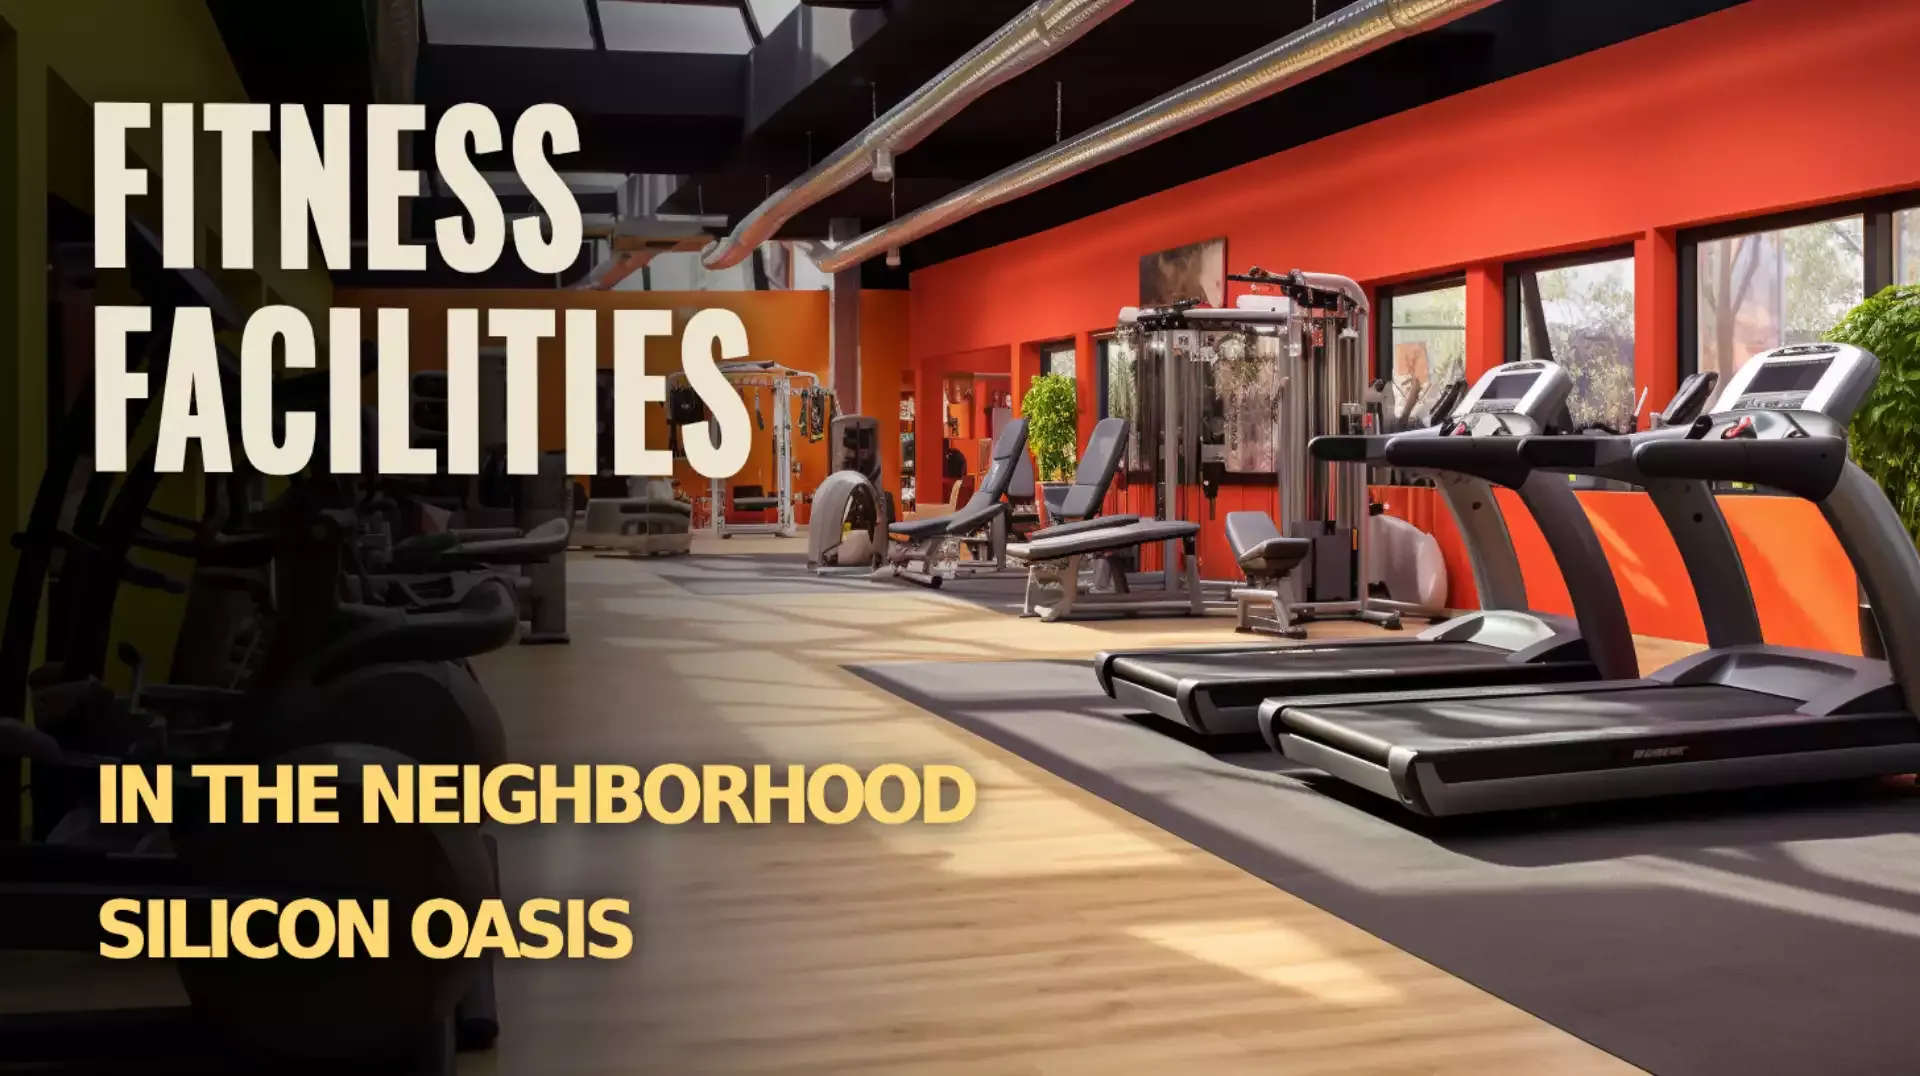 Active Living: Fitness Facilities in Silicon Oasis